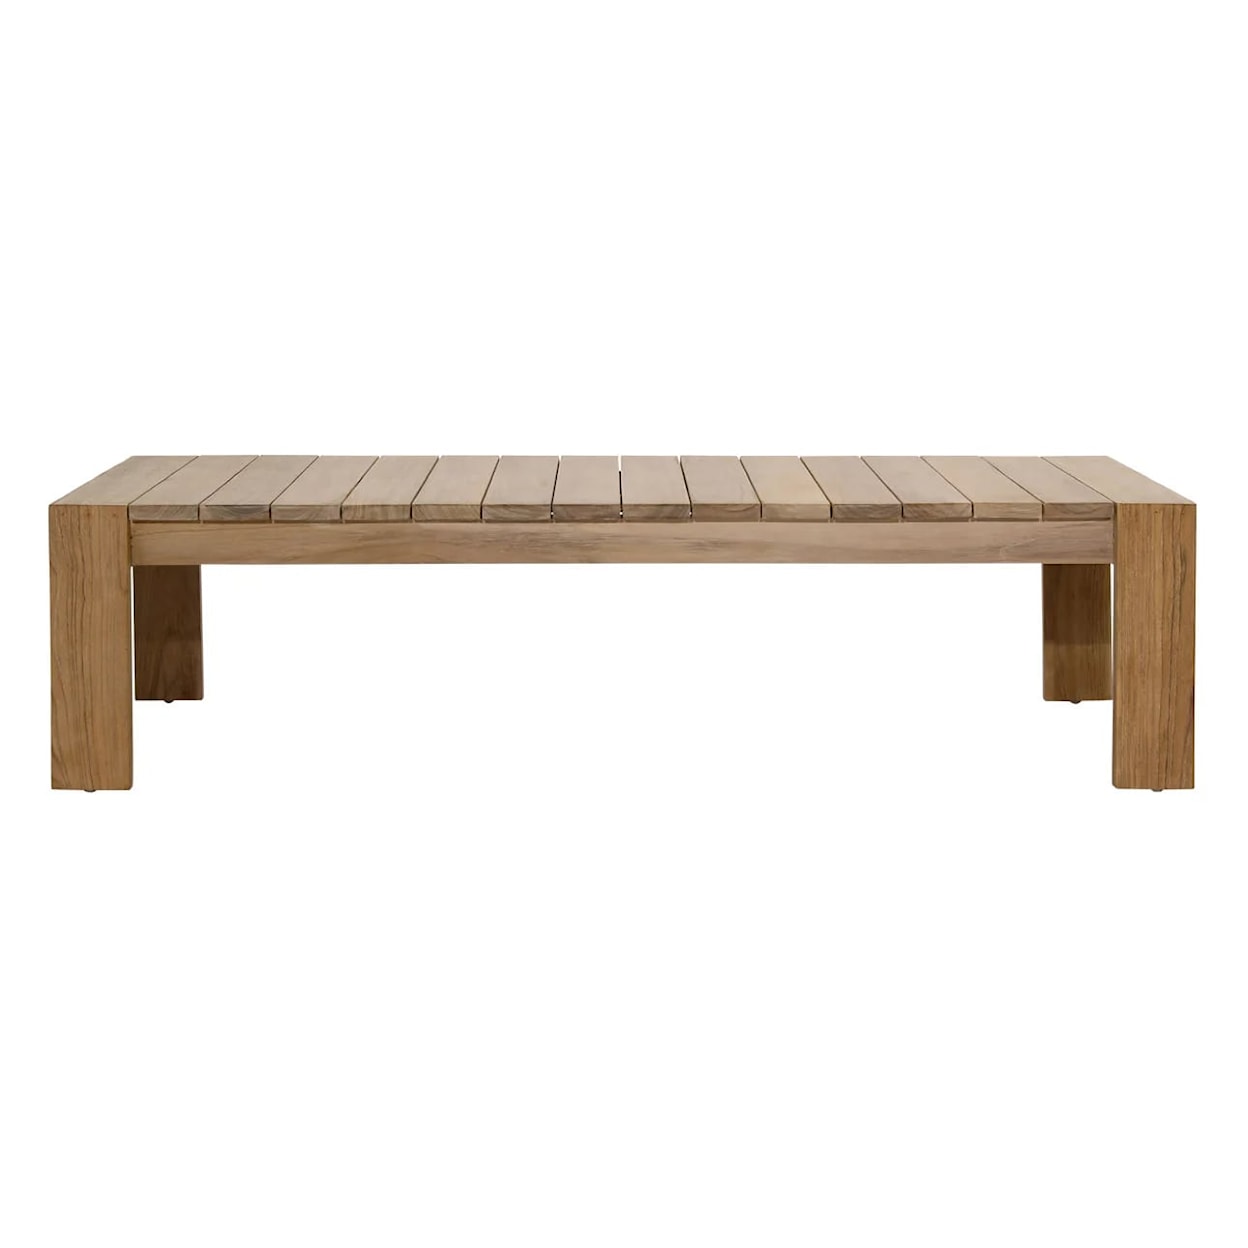 Dovetail Furniture DOV7800 Outdoor Coffee Table